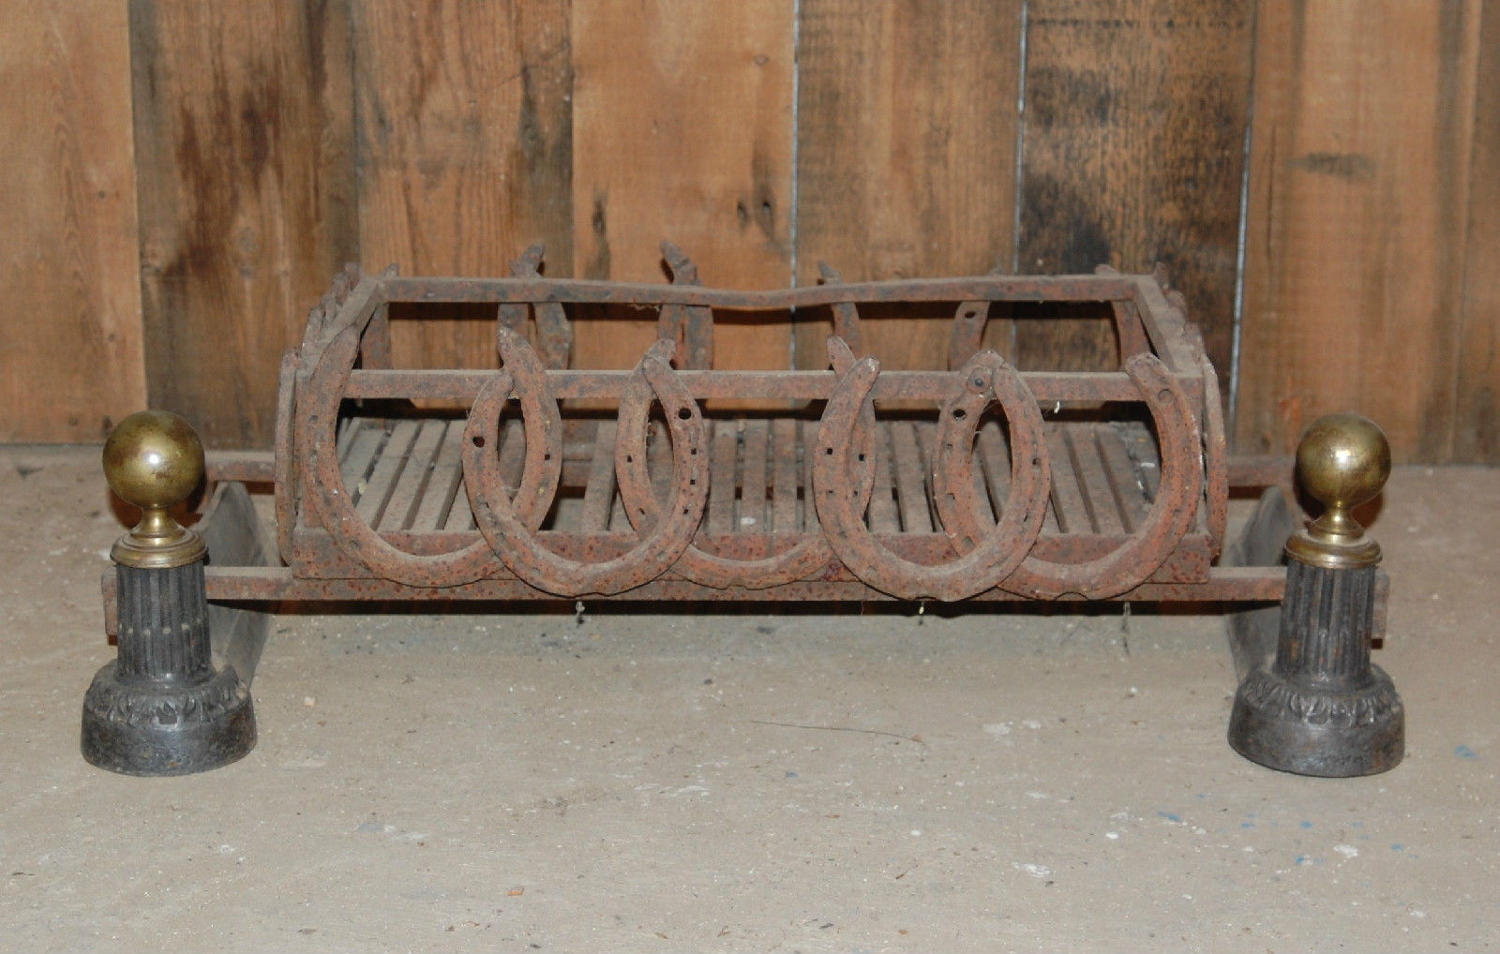 FB0017 A Rustic Fire Basket With Horseshoe Detail and Brass Fire Dogs